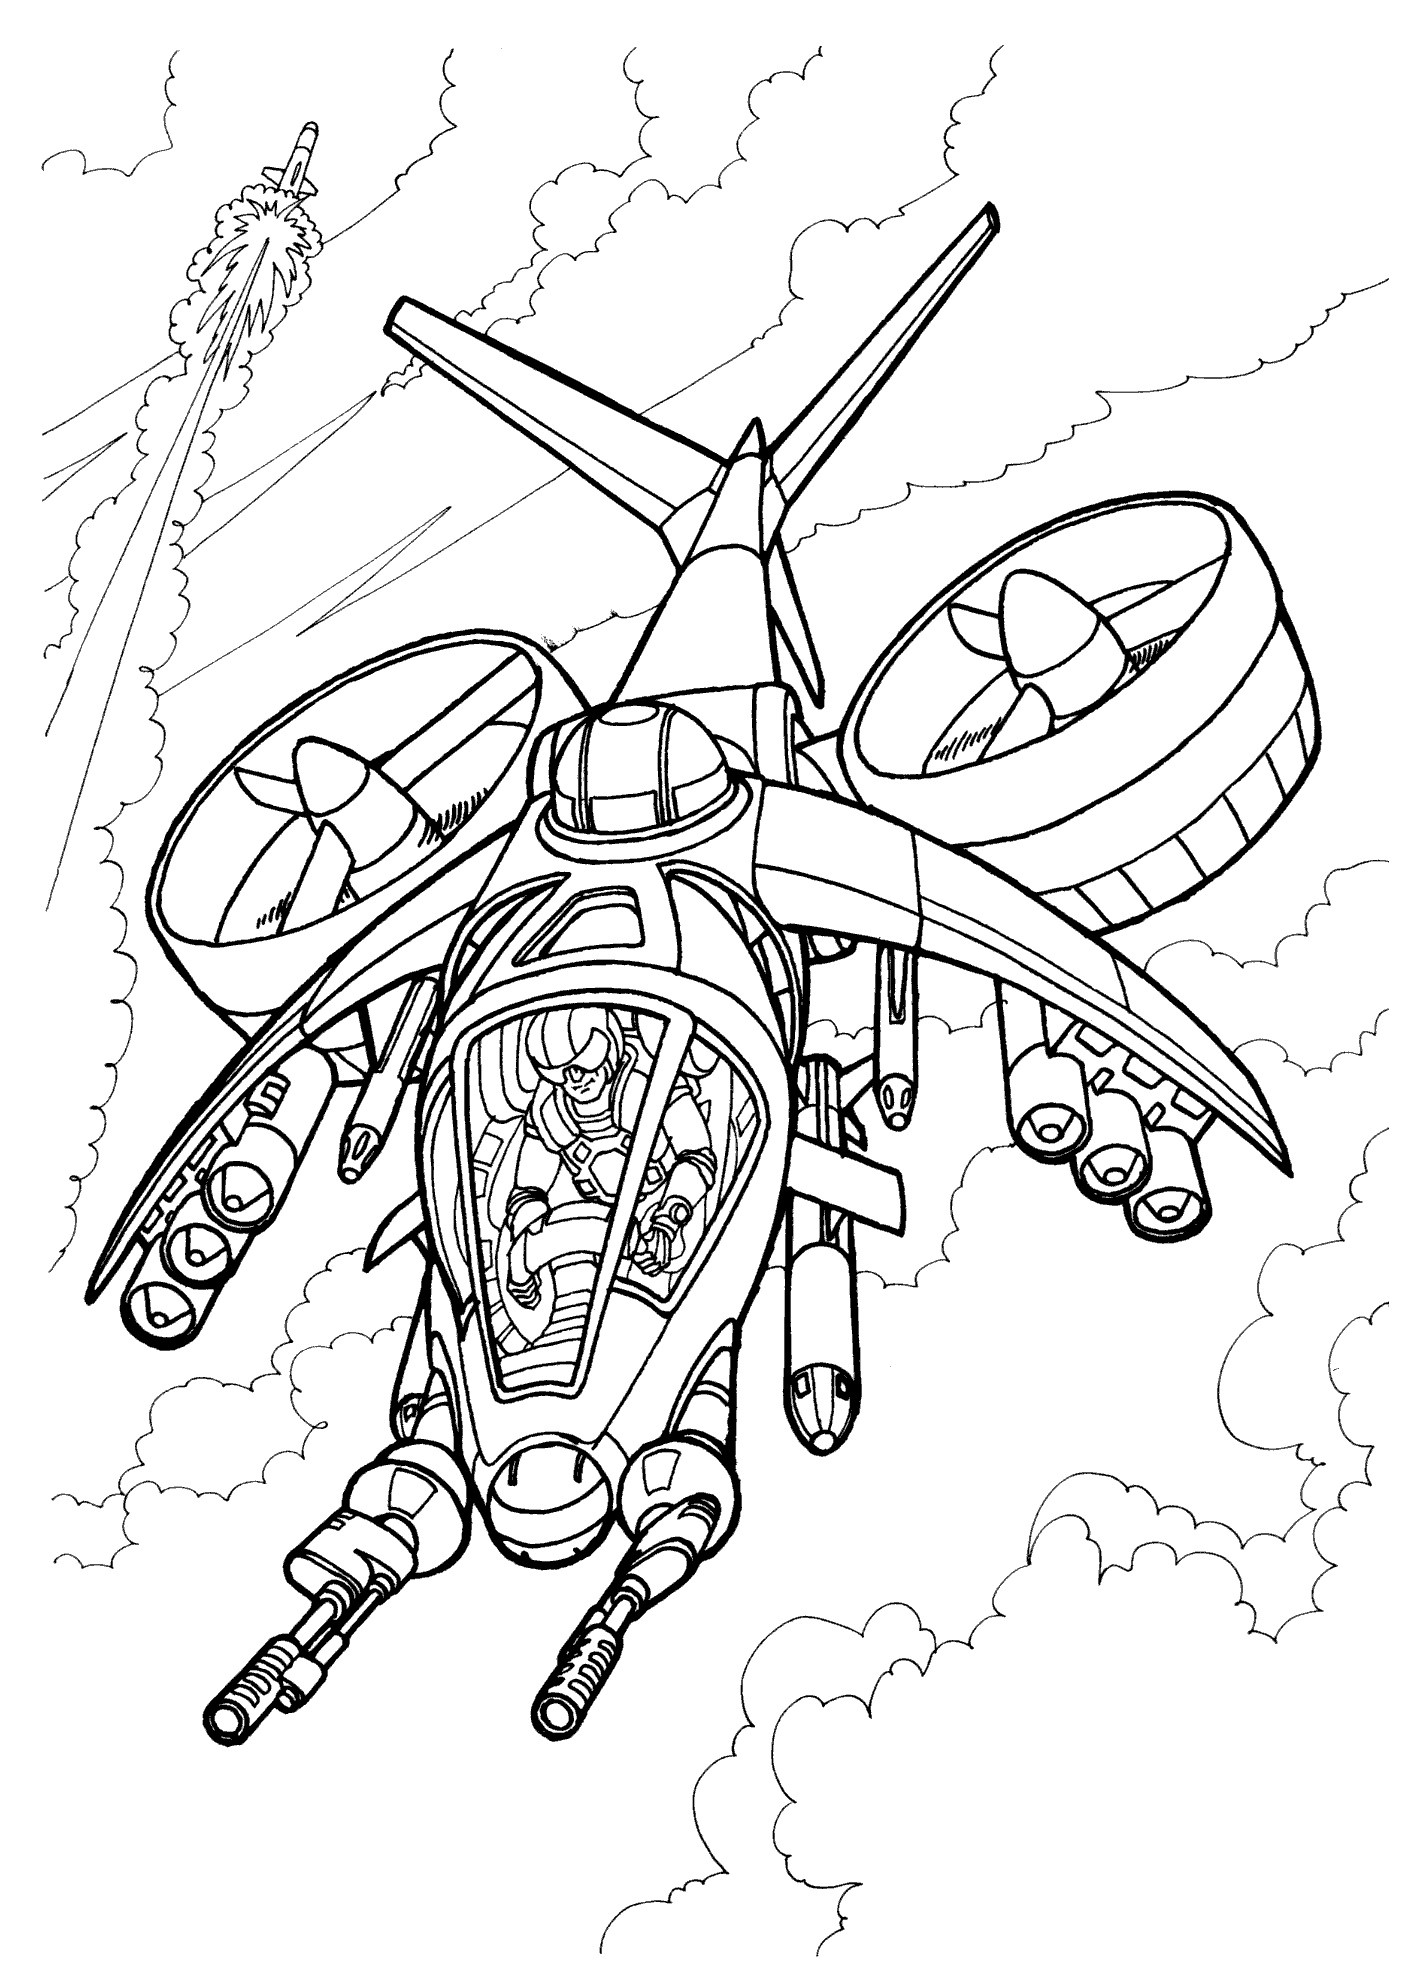 Coloring page - Military helicopter of the future